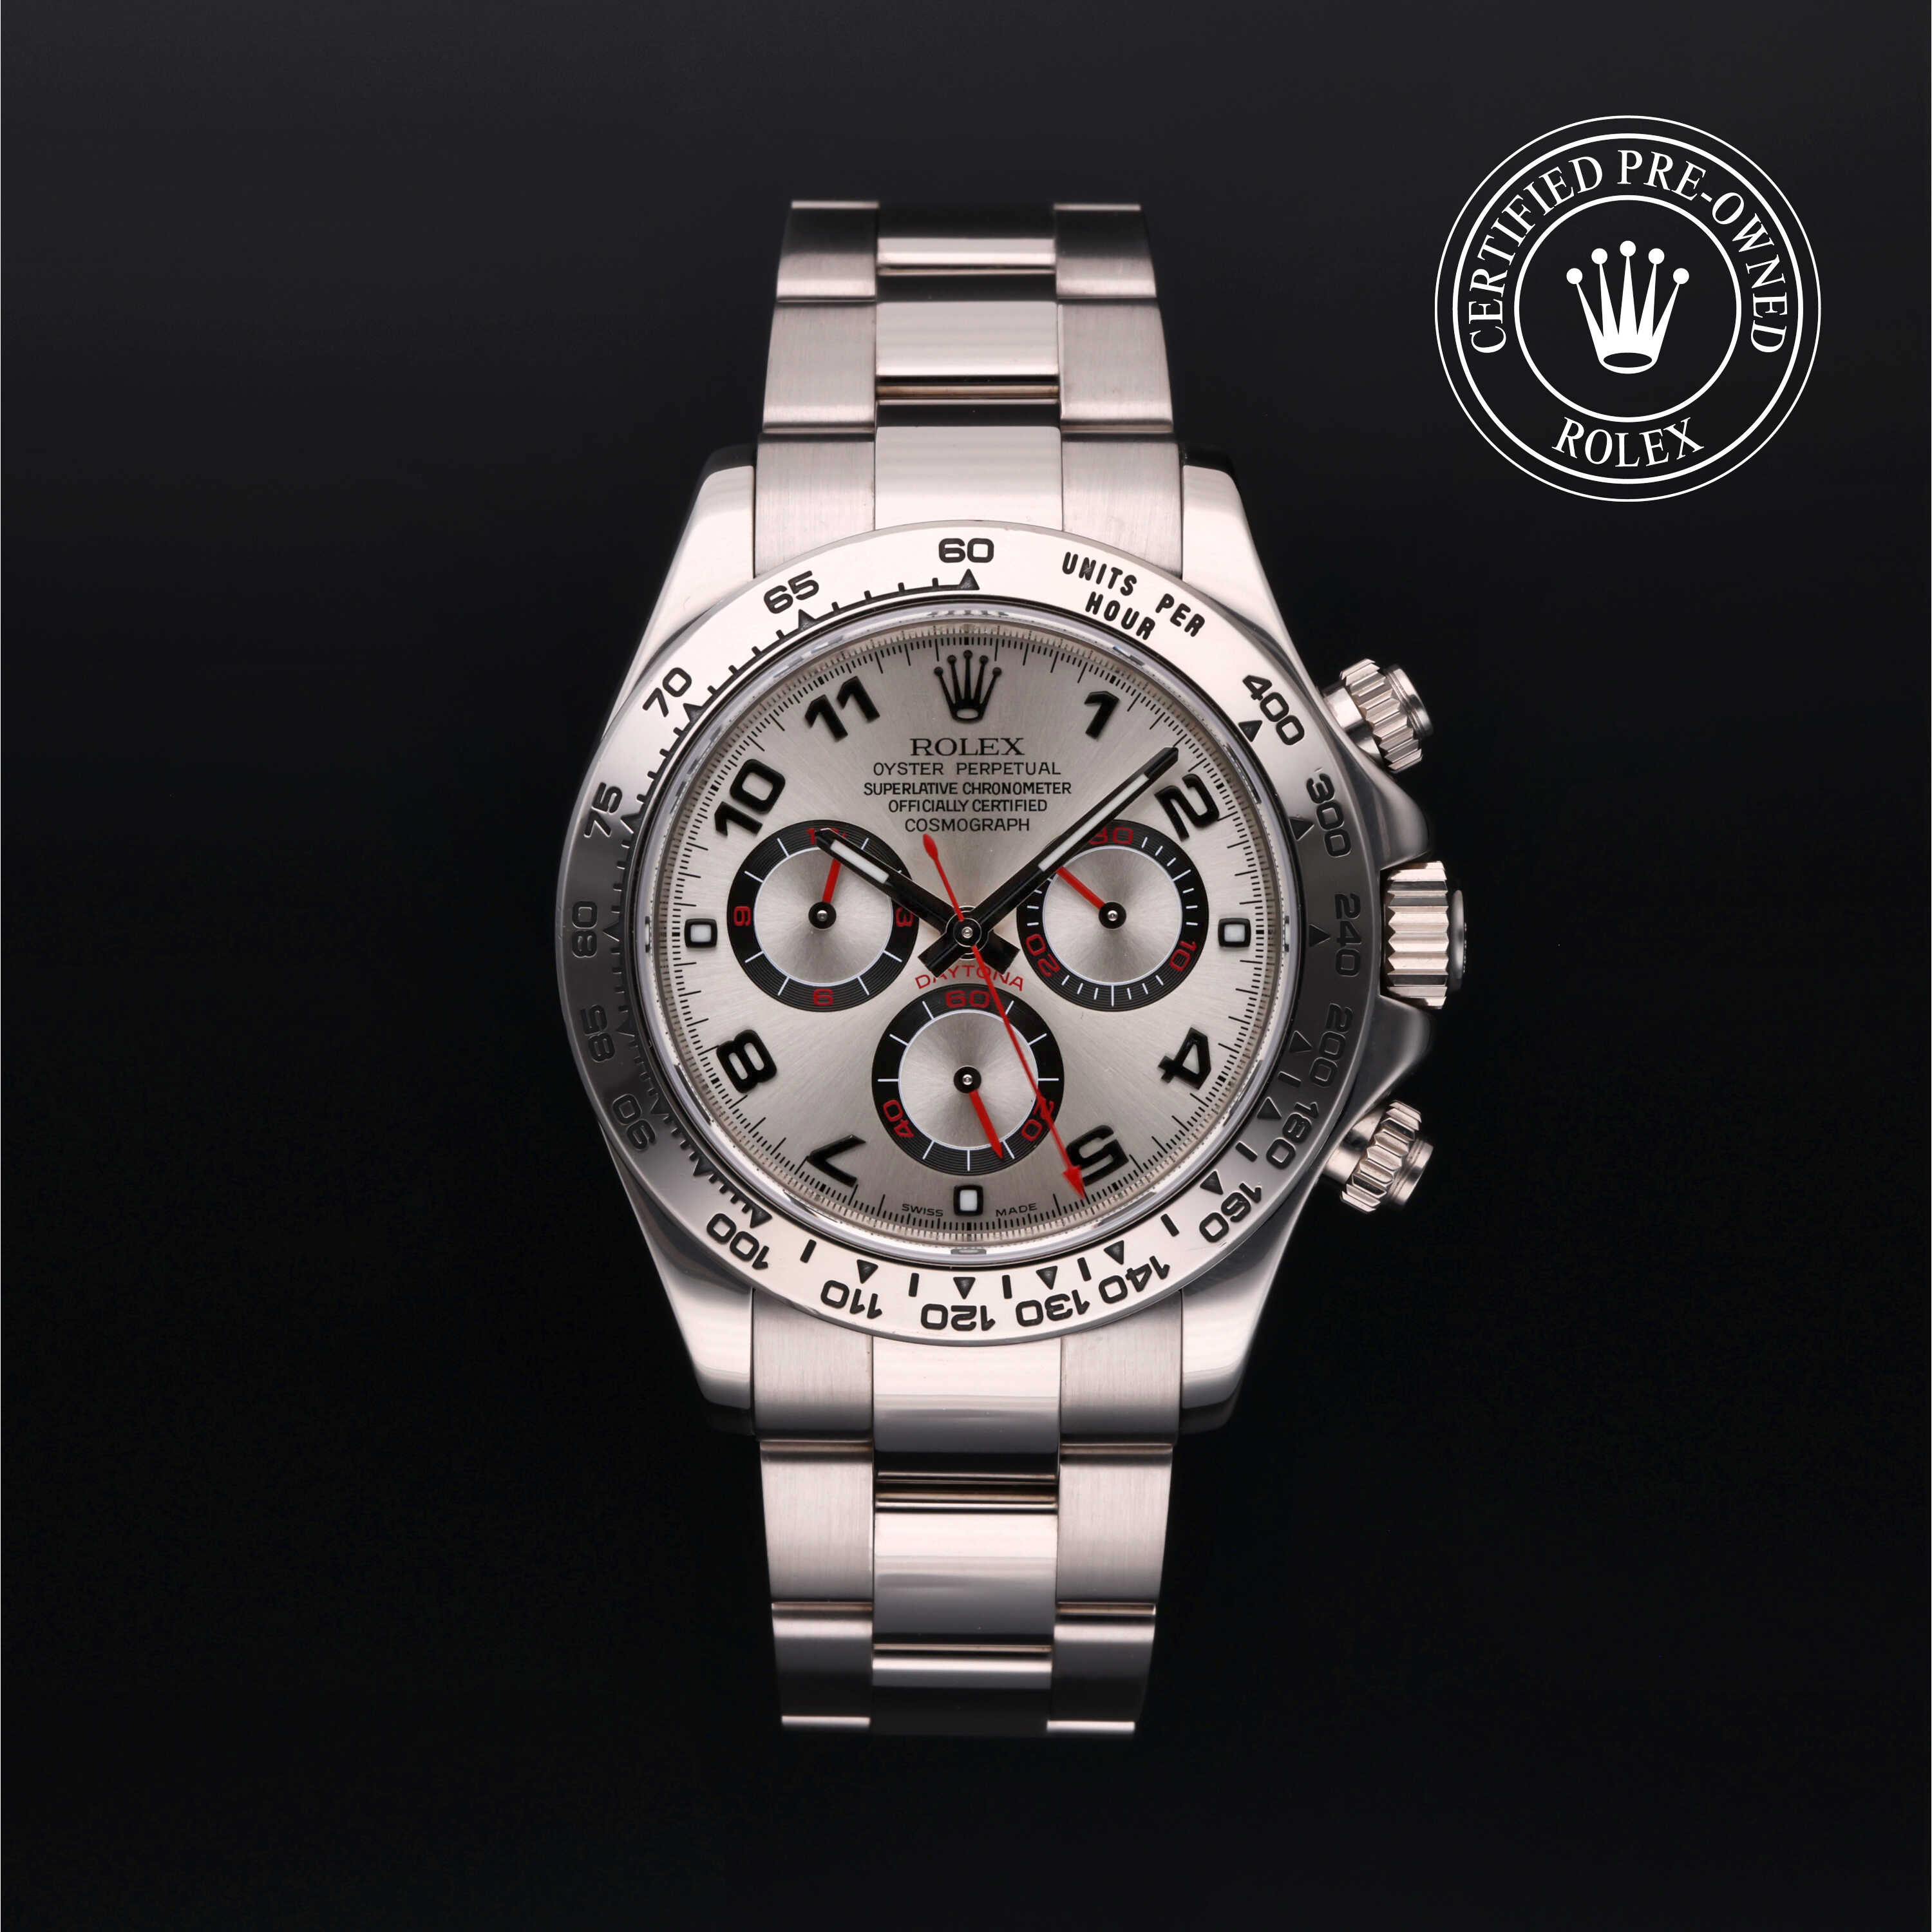 Rolex ® Cosmograph Daytona Official Certified Pre-Owned